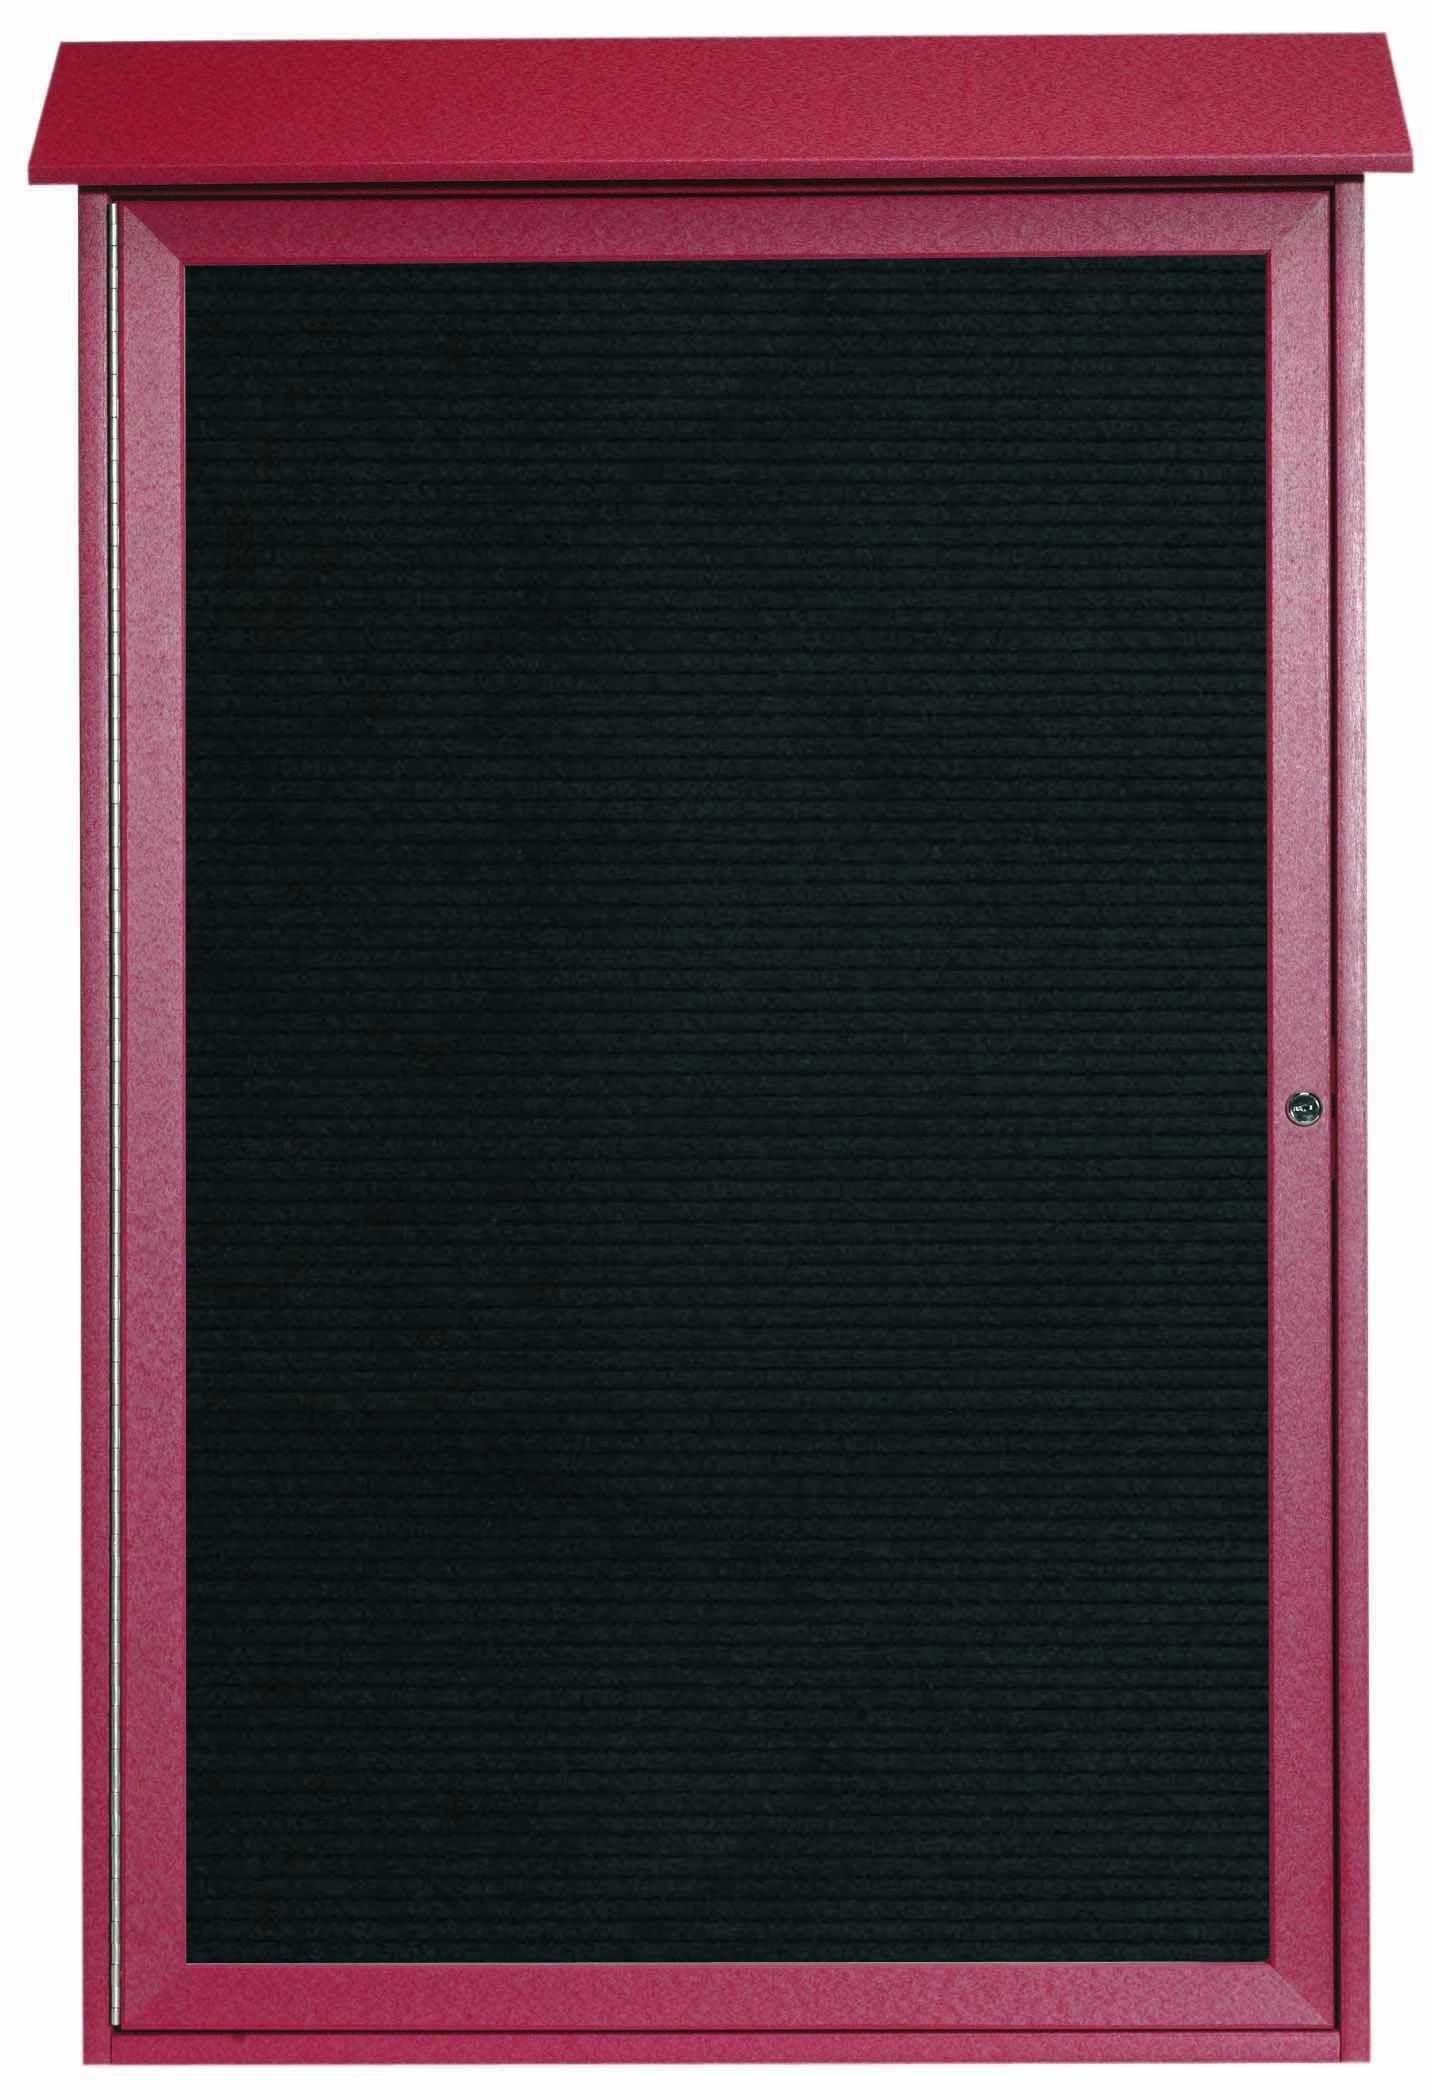 Aarco Products PLD4832L-7 Rosewood Single Hinged Door Plastic Lumber Message Center with Letter Board, 32"W x 48"H